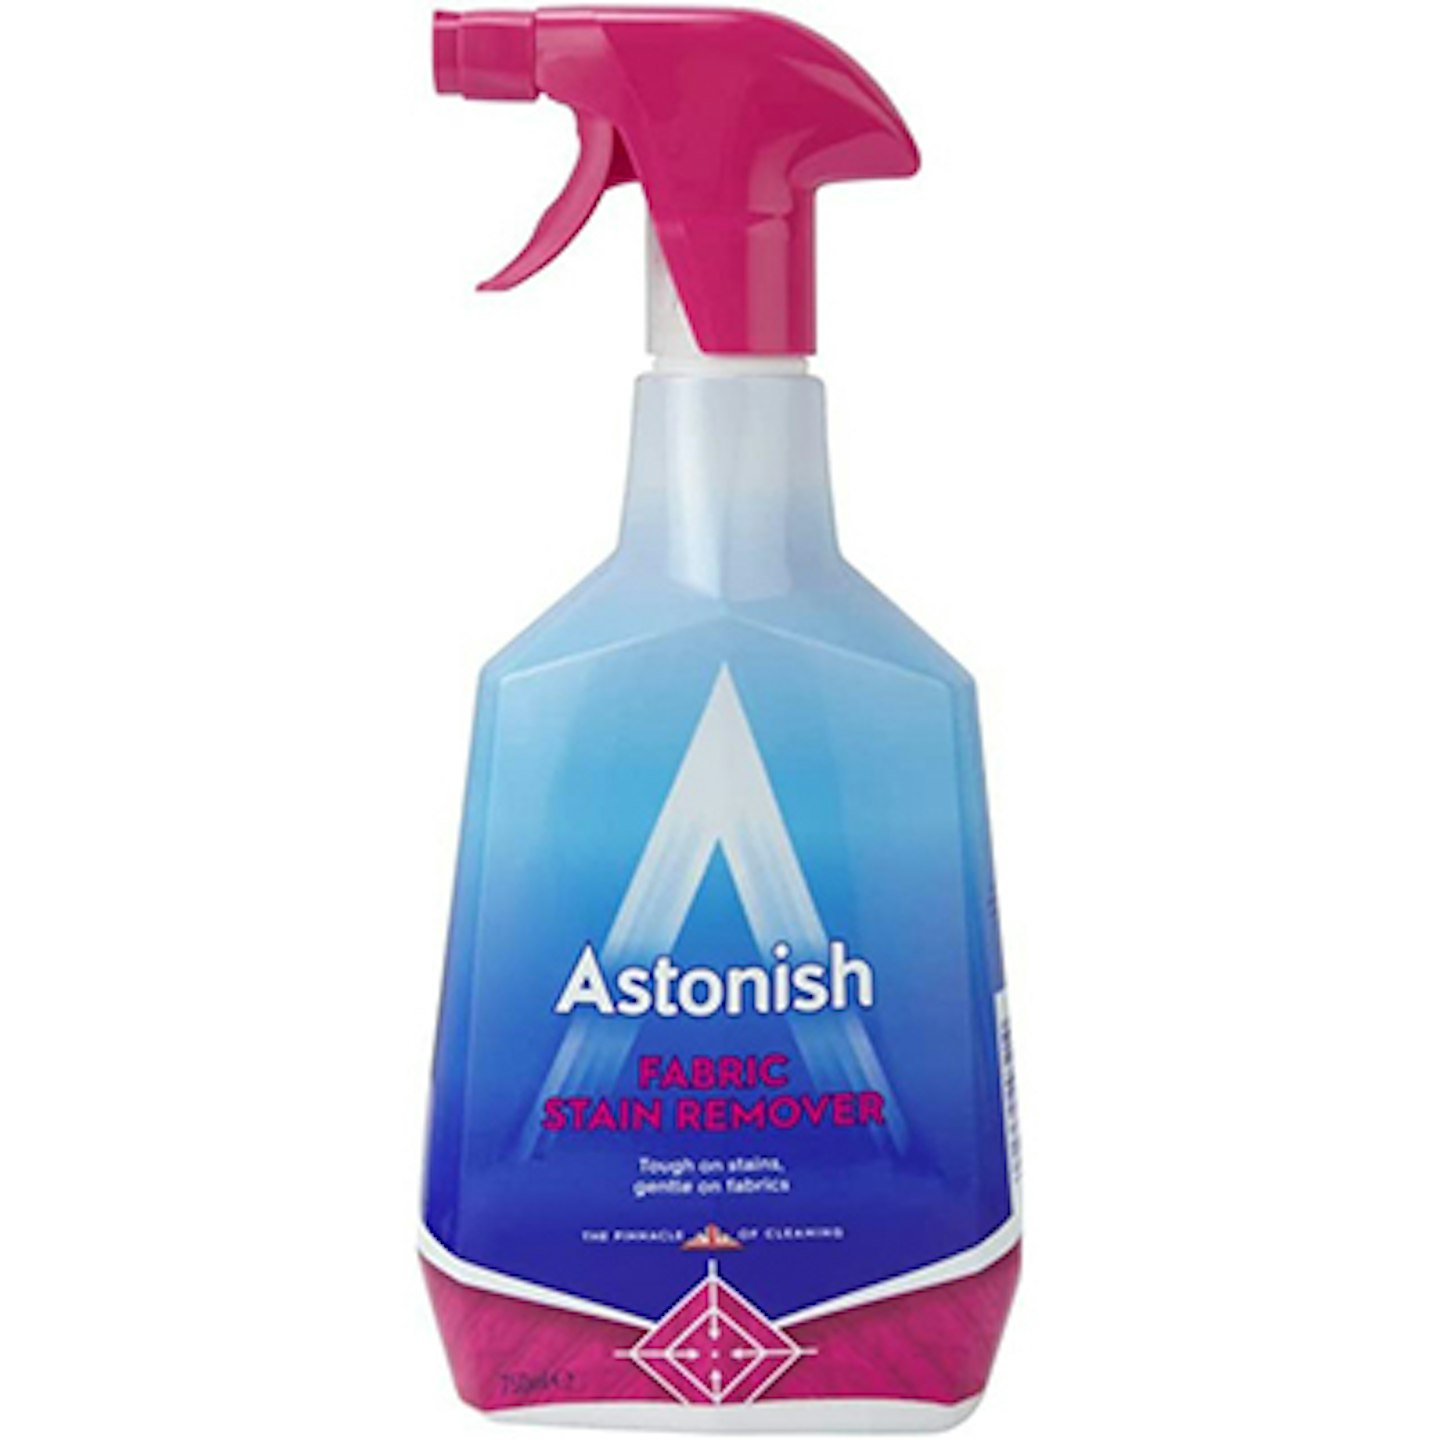 Astonish fabric stain remover